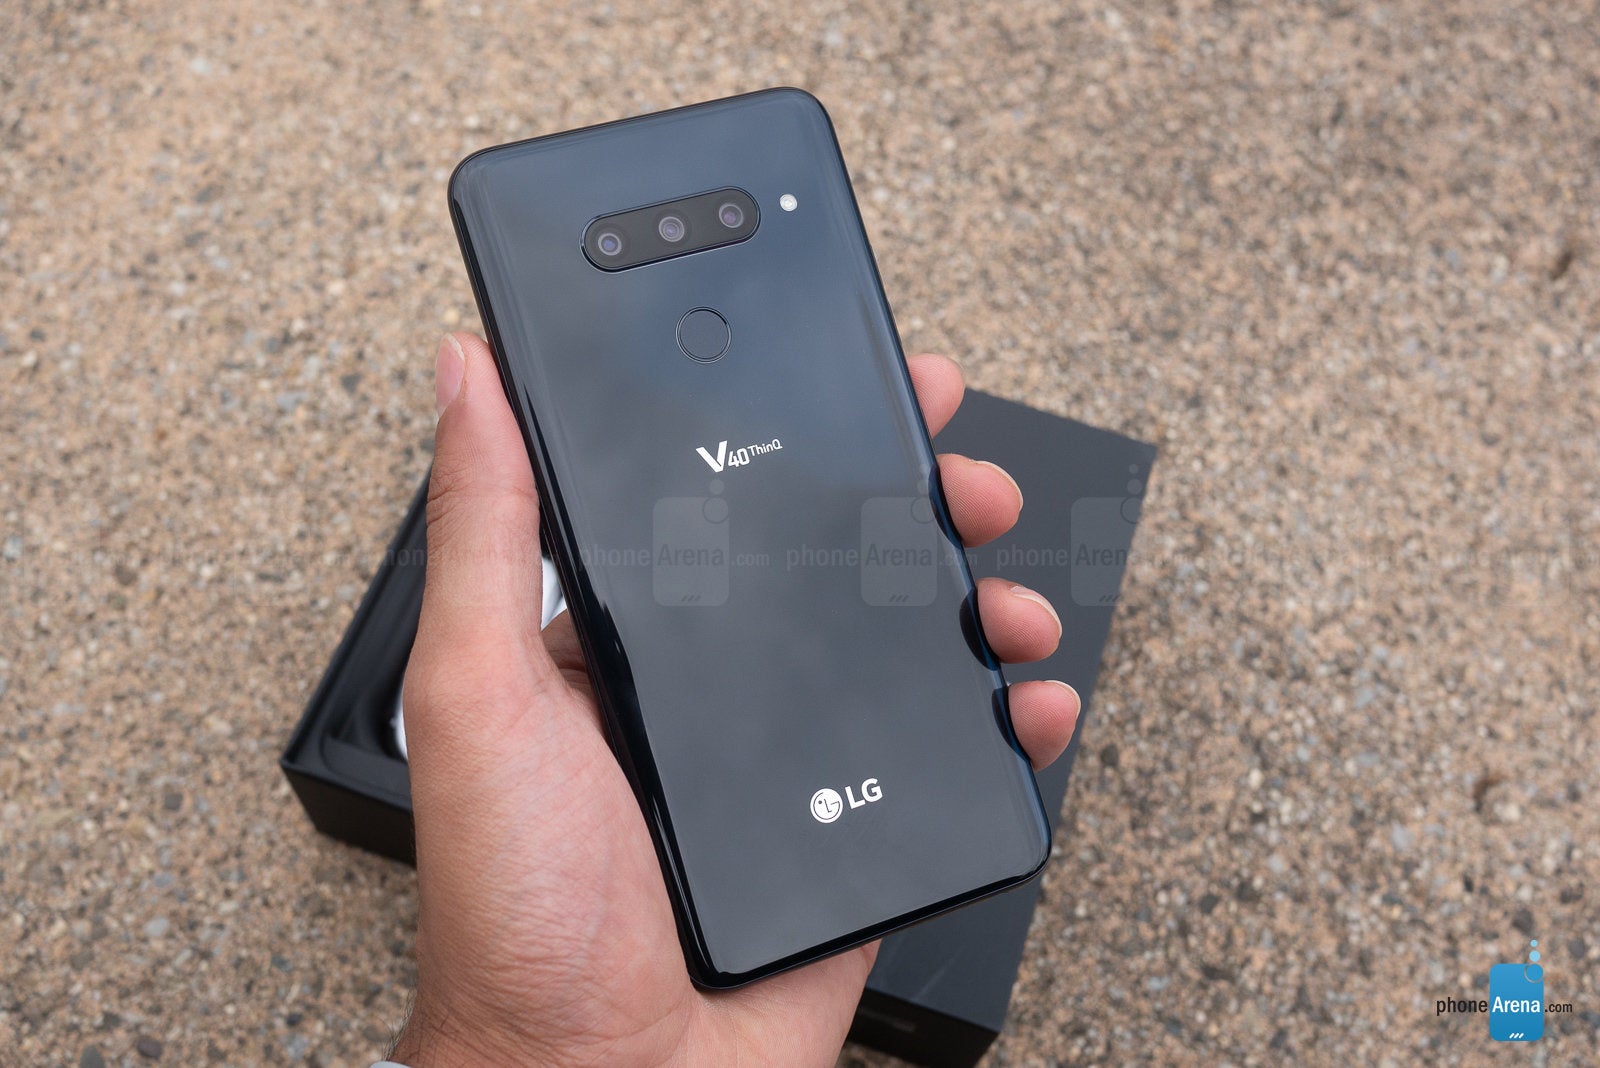 LG V40 ThinQ Unboxing and First Look: Three cameras, triple the fun